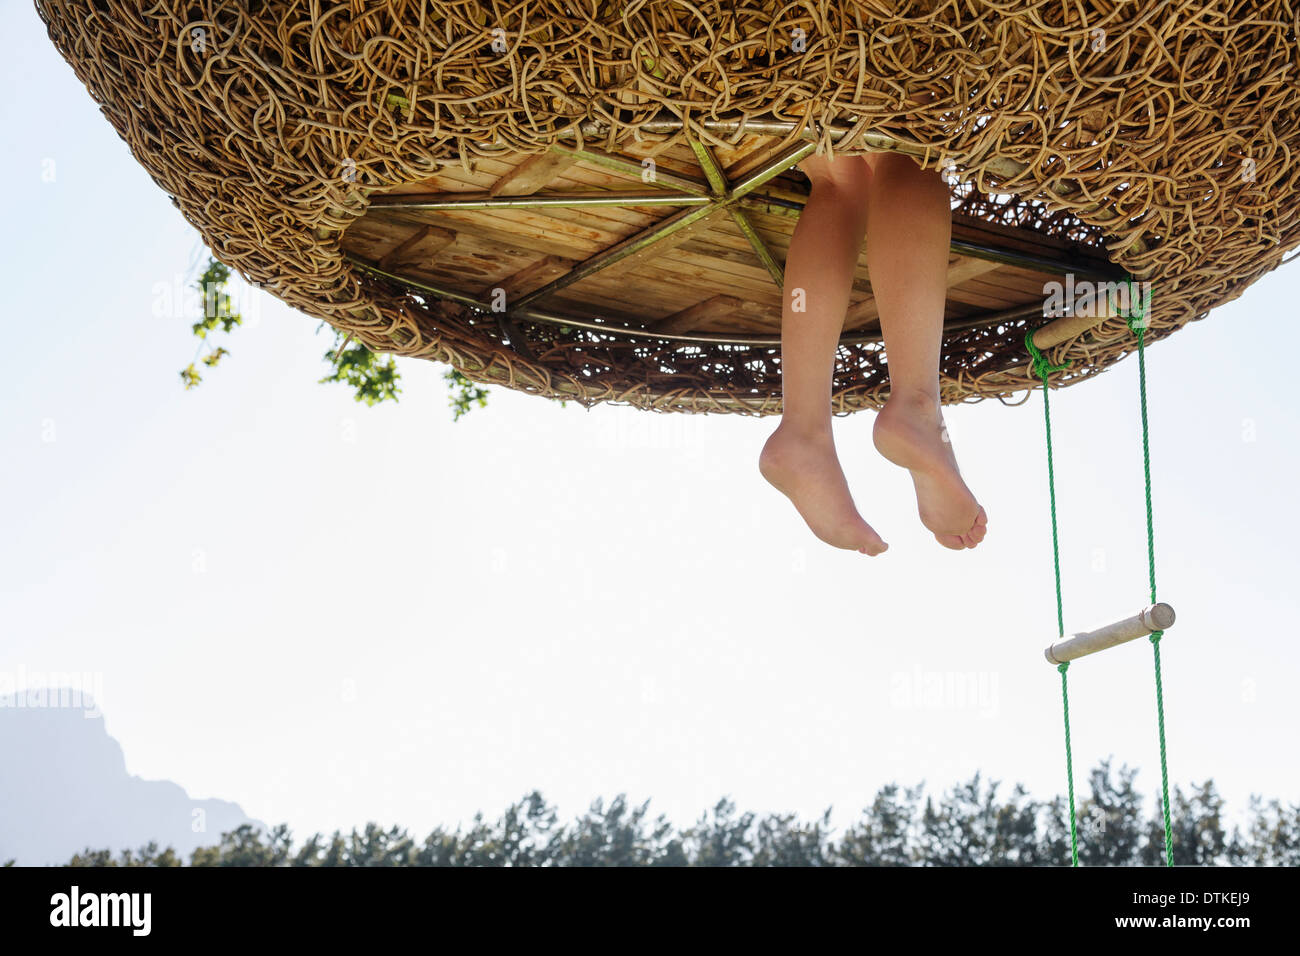 Woman's feet dangling out of nest tree house Stock Photo